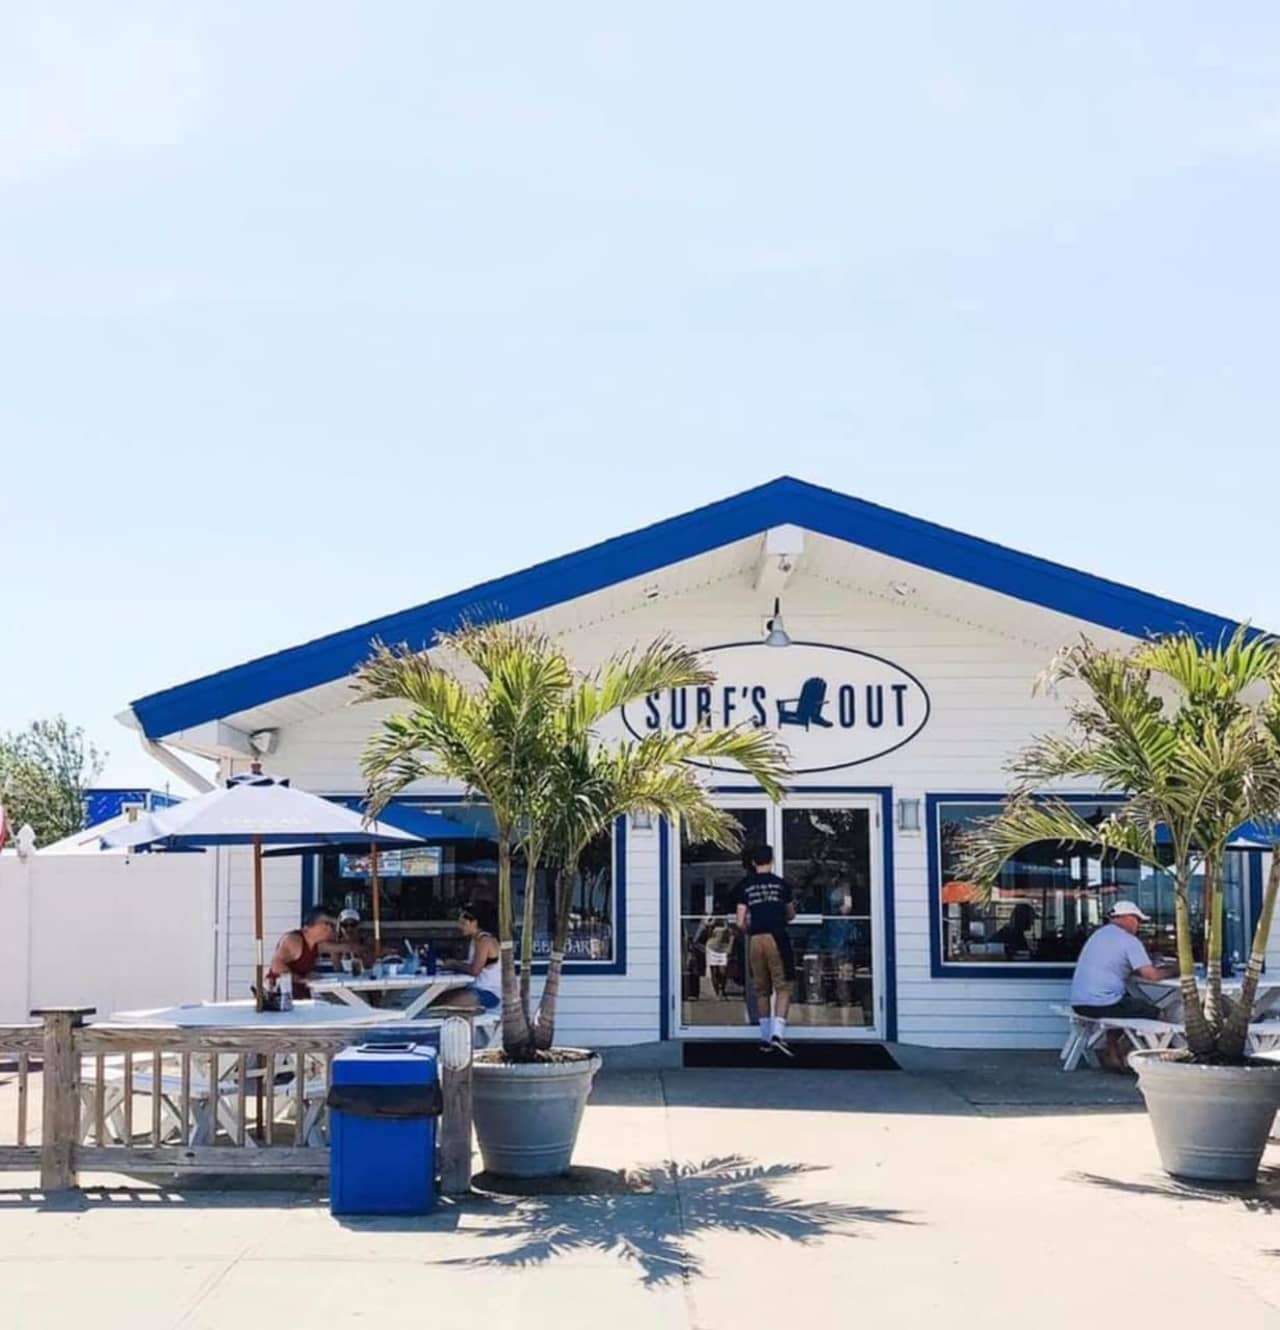 The popular Fire Island restaurant, Surf's Out is closing its doors.